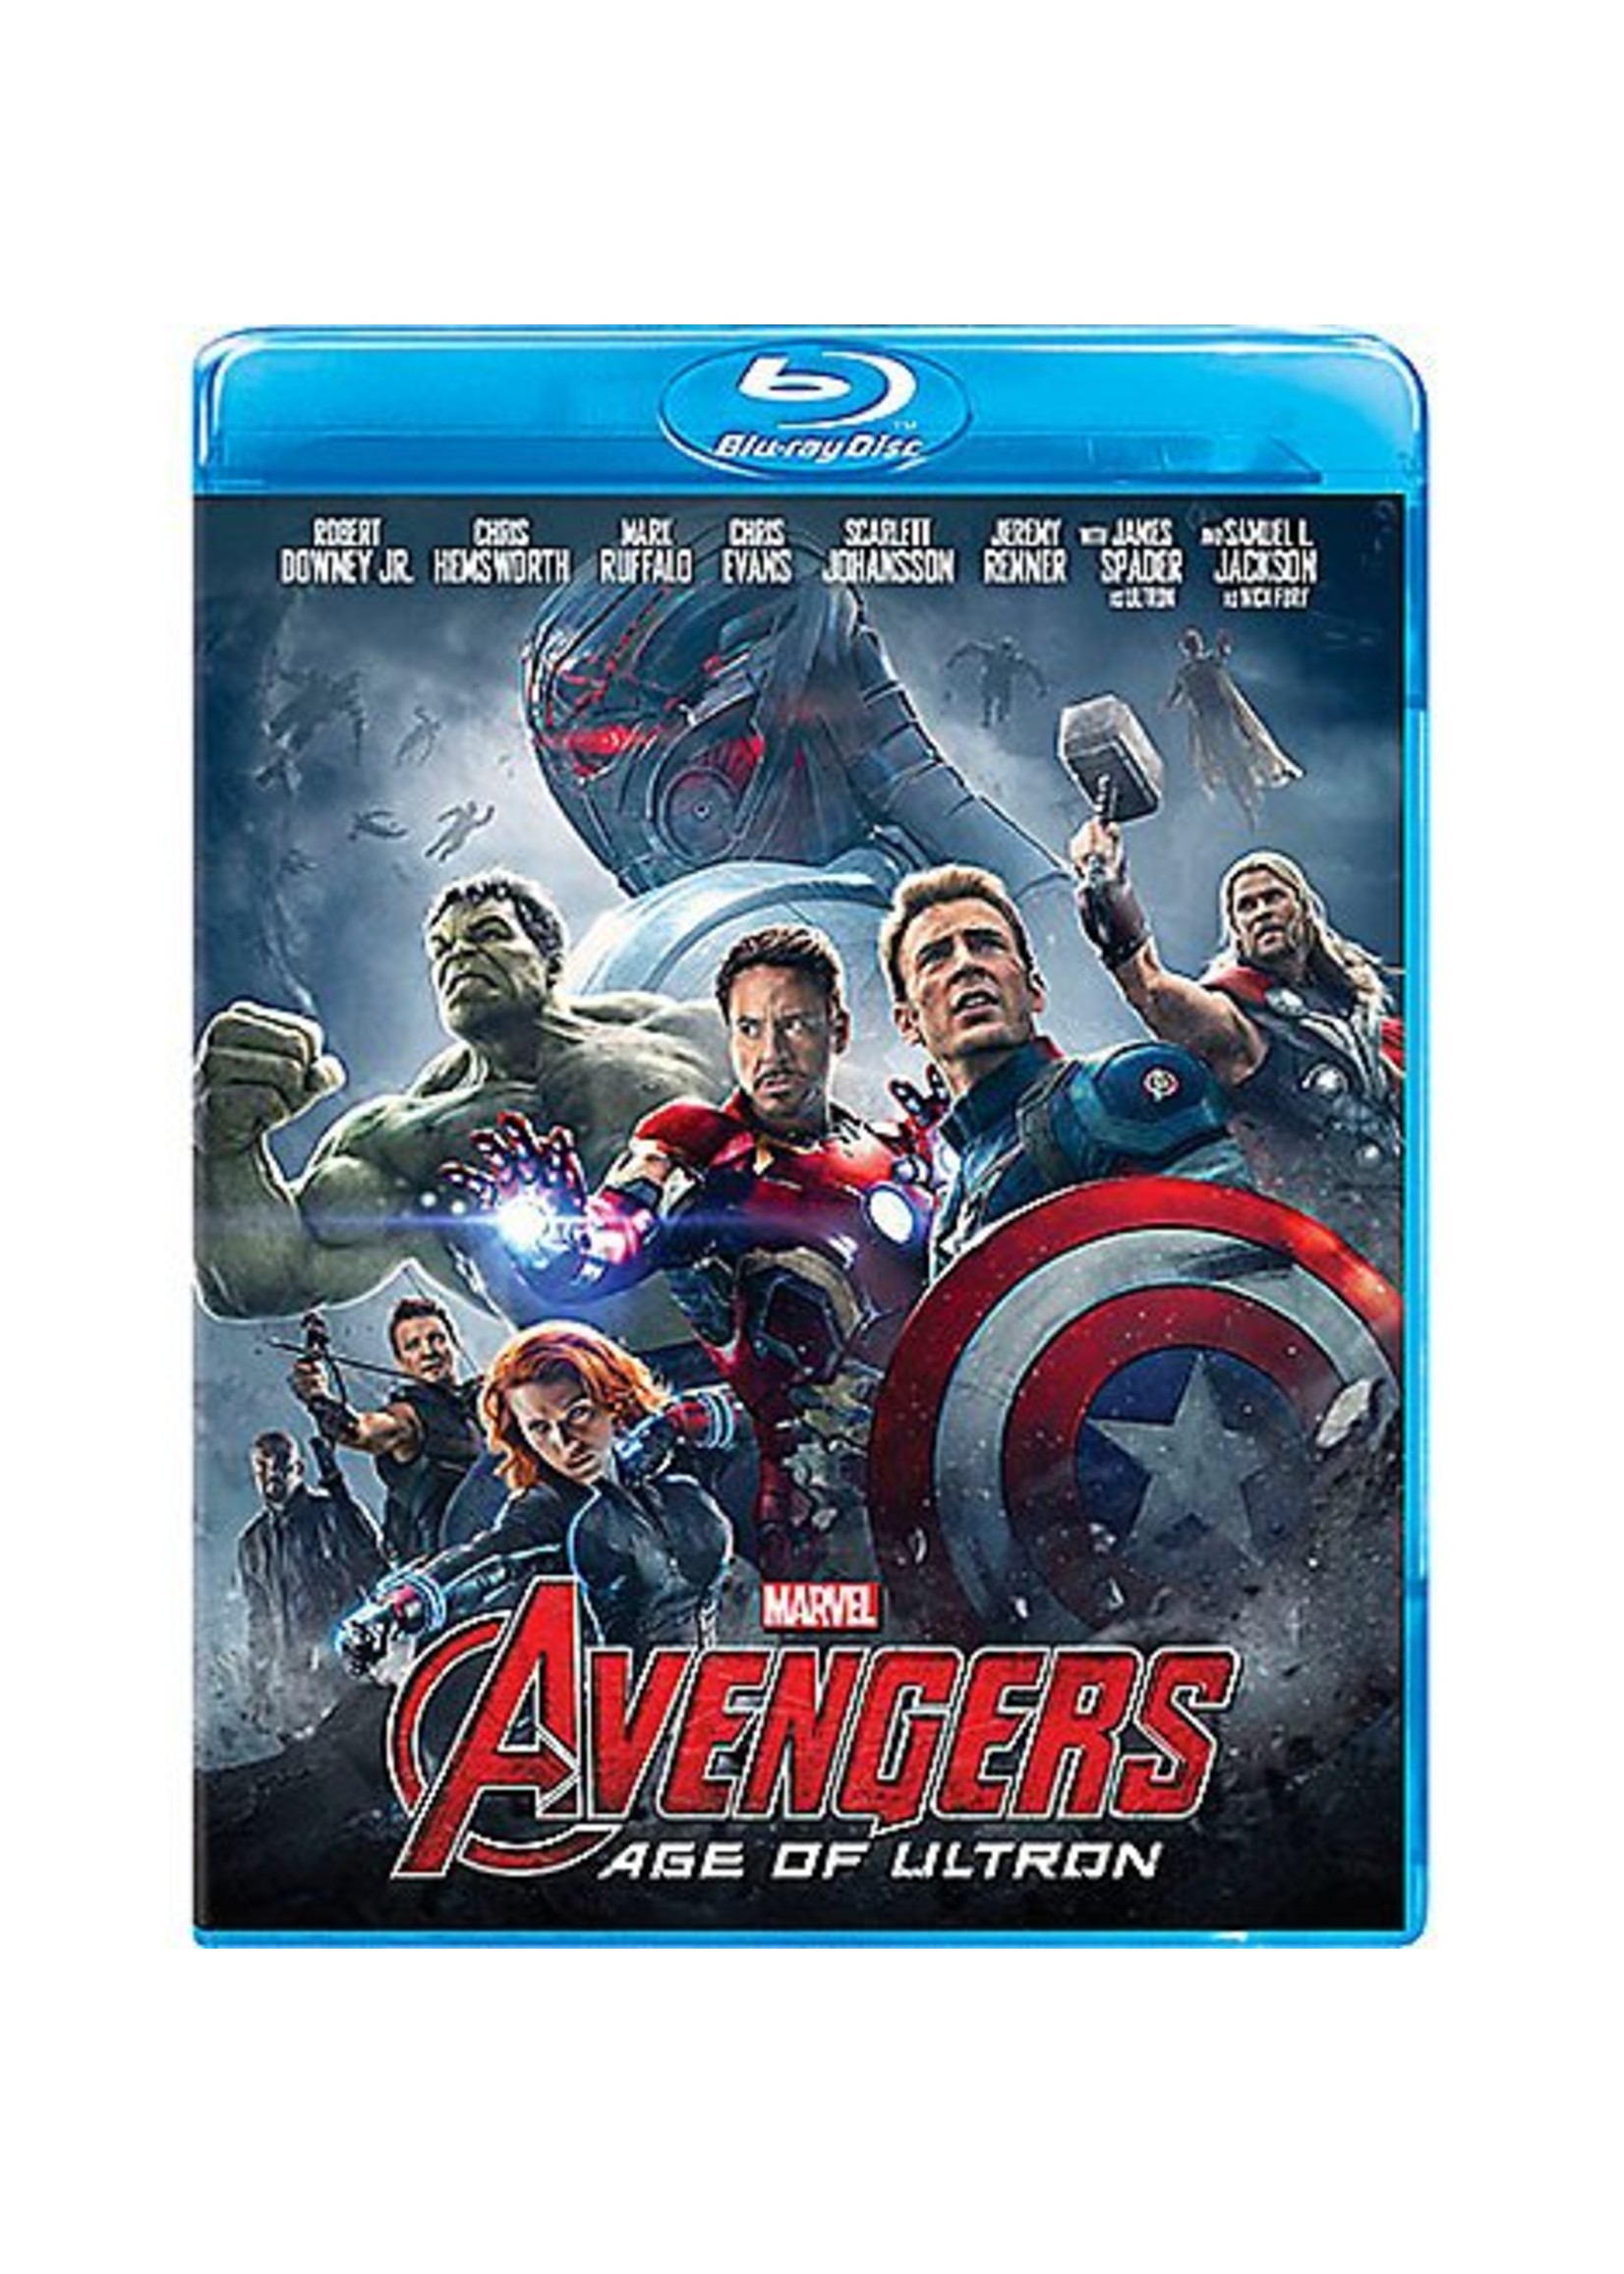 BluRay Movie Avengers Age of Ultron